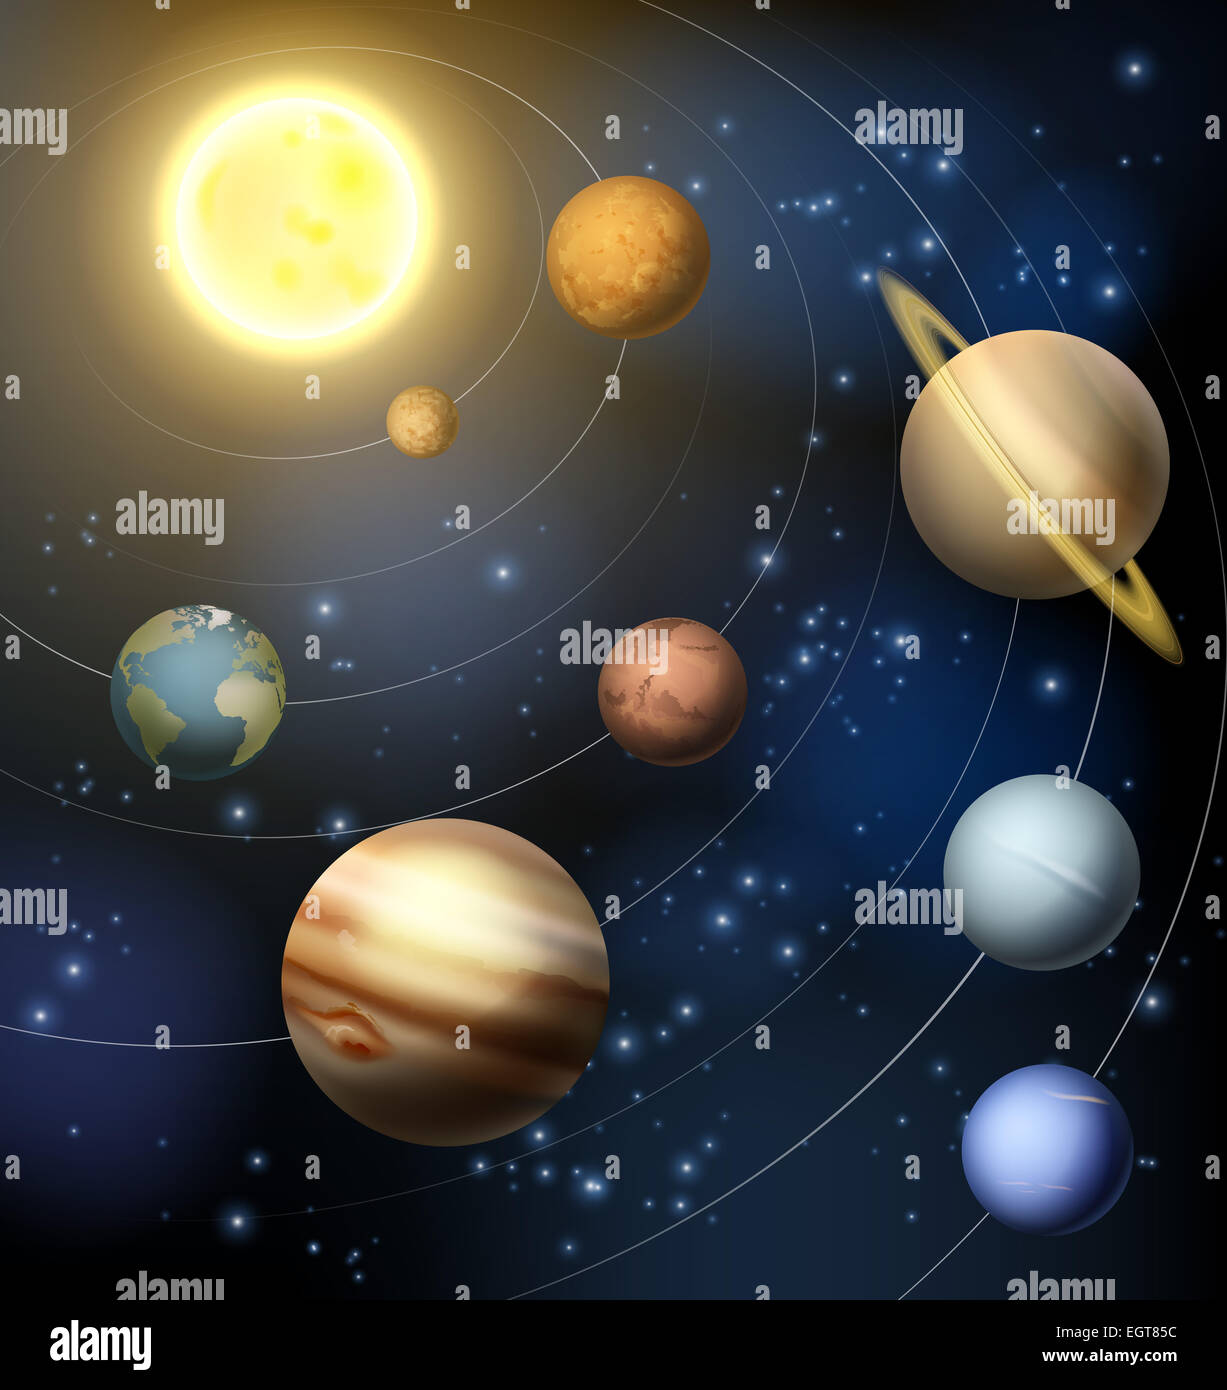 Planets of the solar system around the sun illustration Stock Photo